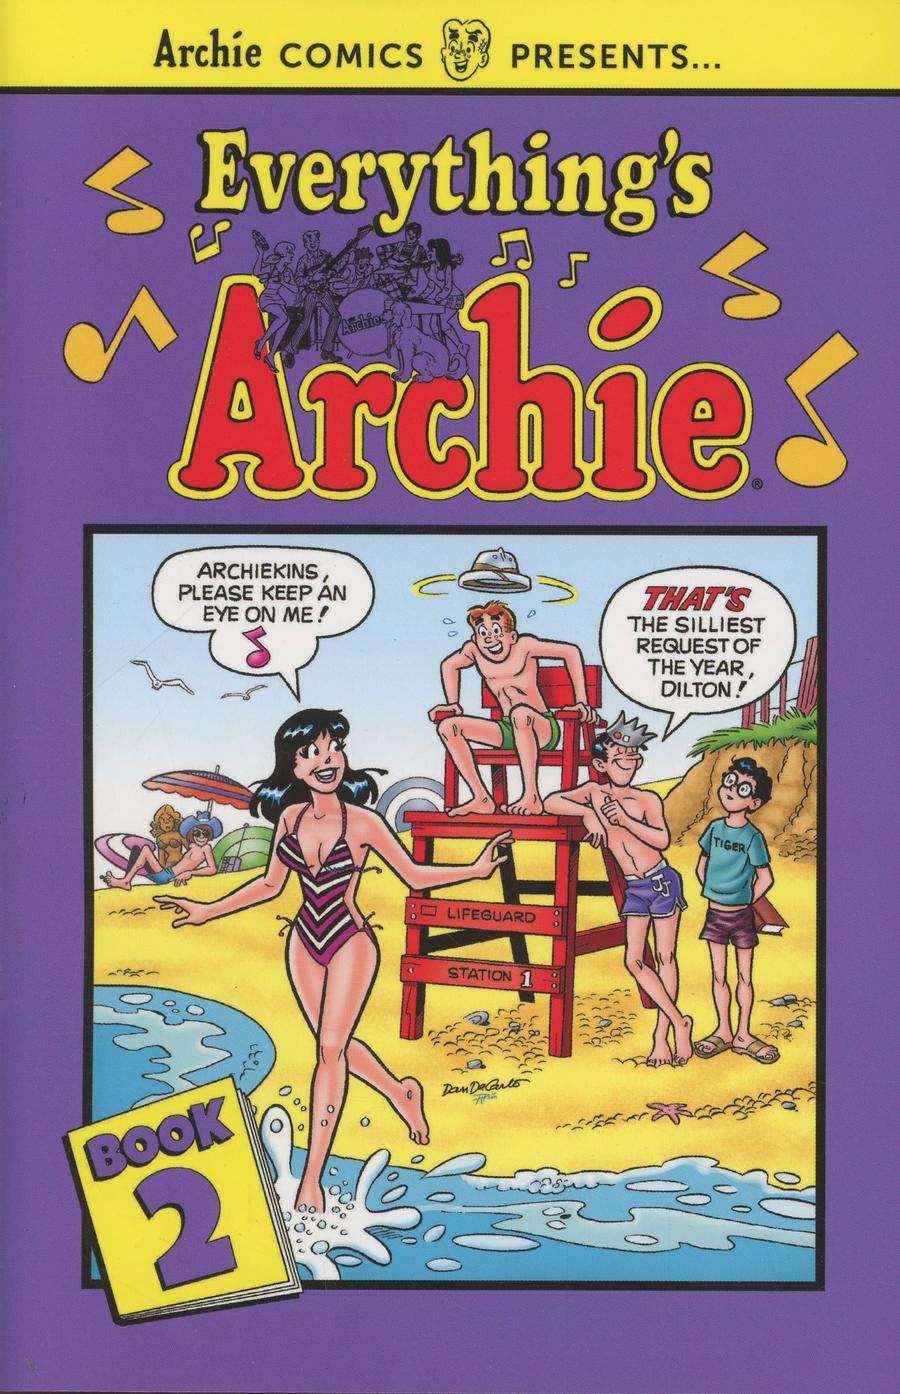 Everythings Archie Vol 2 TP